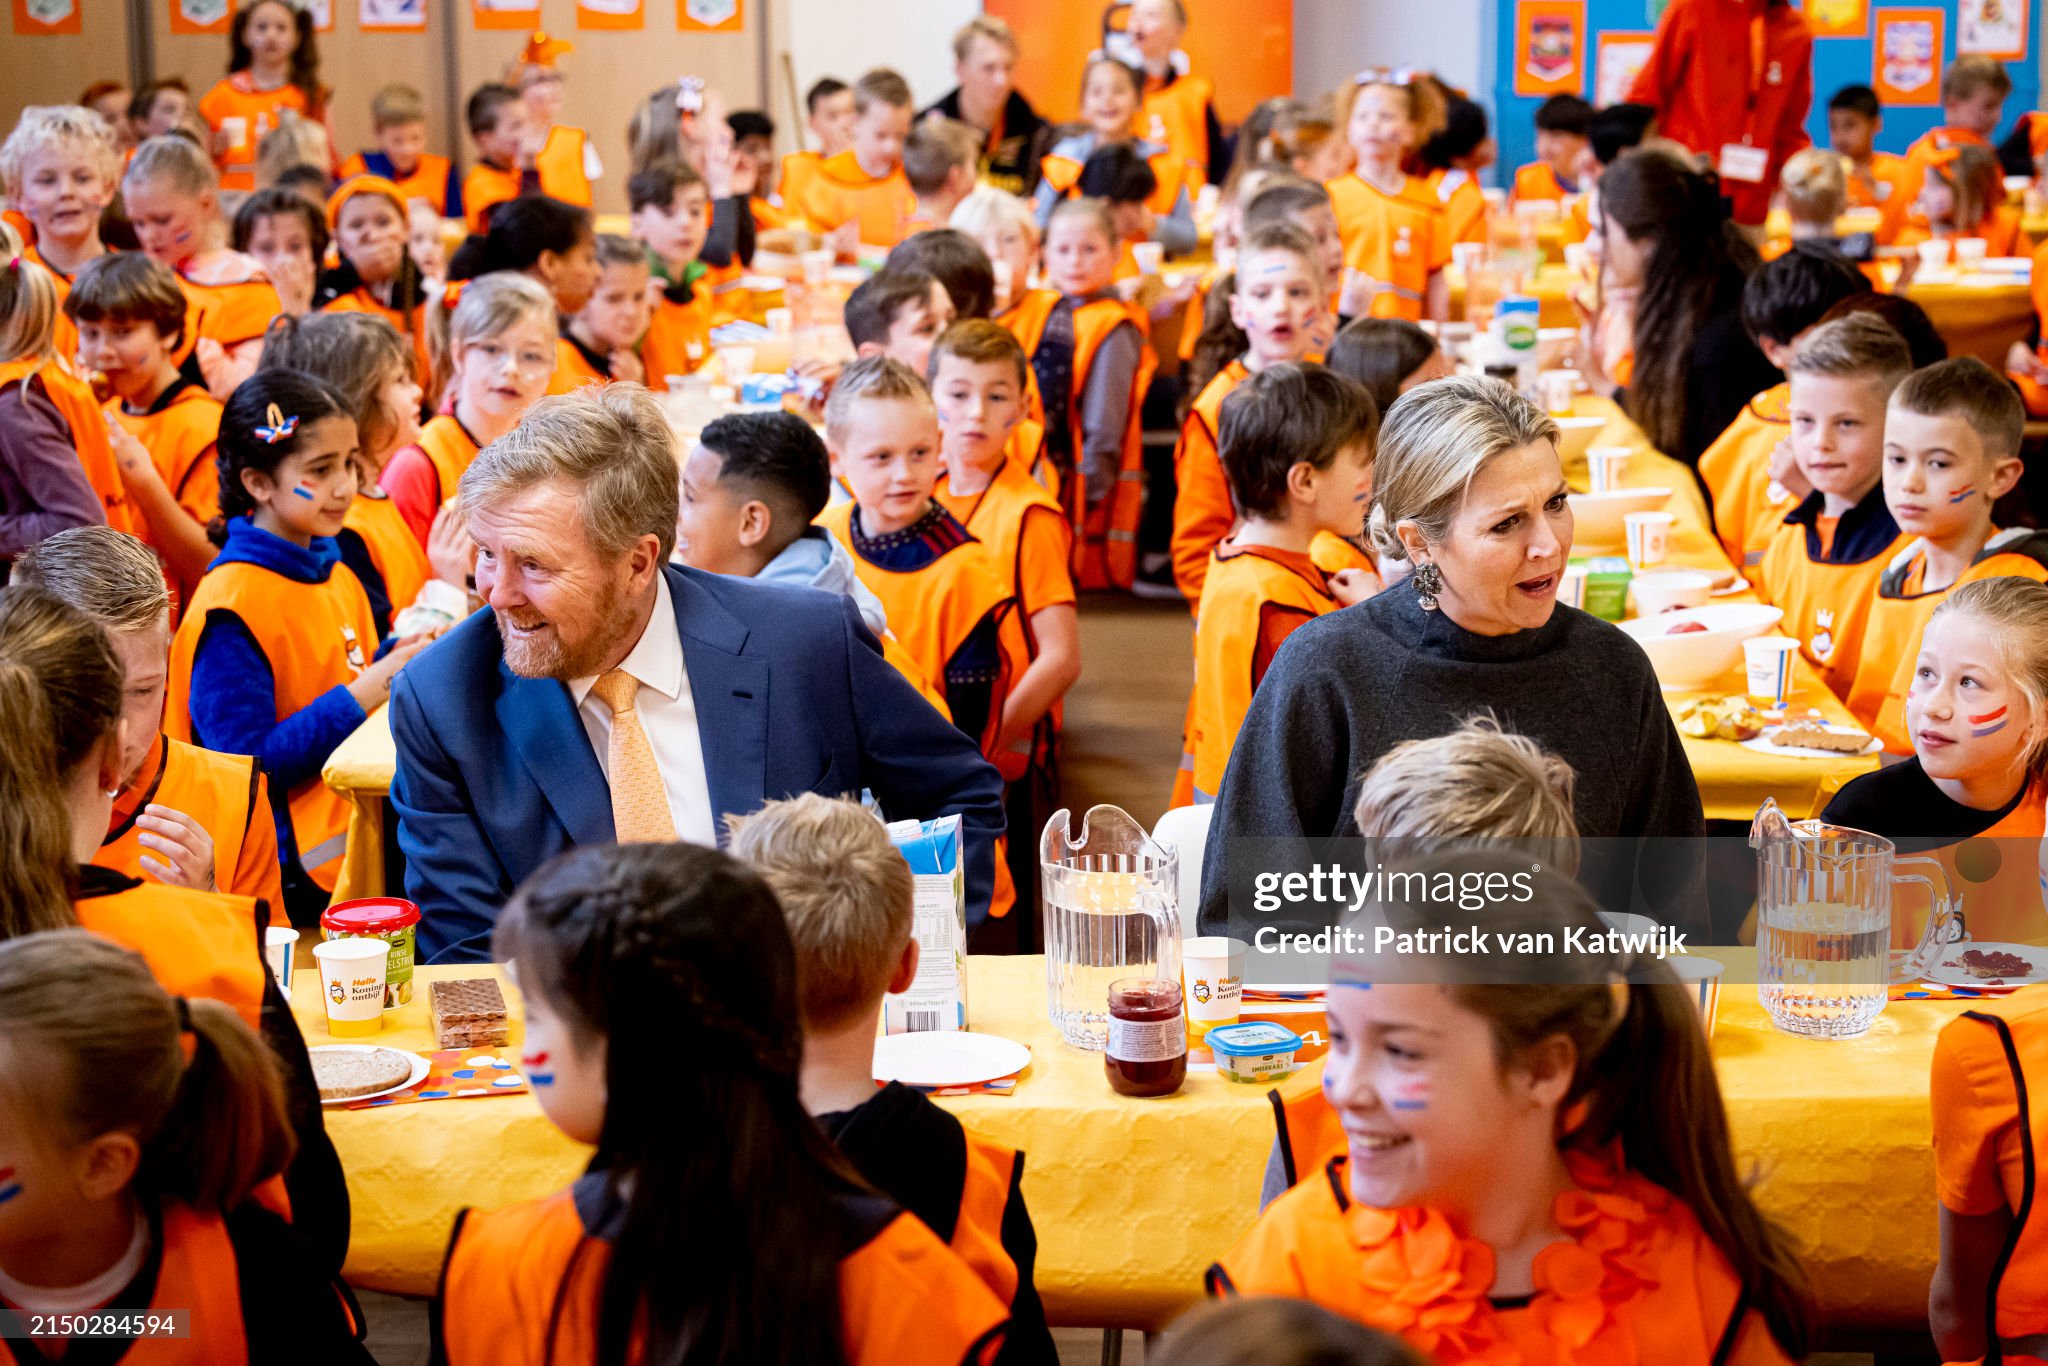 king-willem-alexander-queen-maxima-of-the-netherlands-visits-attend-the-kinsgame-in-hoofddorp.jpg?s=2048x2048&w=gi&k=20&c=bopA1Z9bNEsc2UzK6otOOaBEuf5zc7lMboi3sKTswZo=